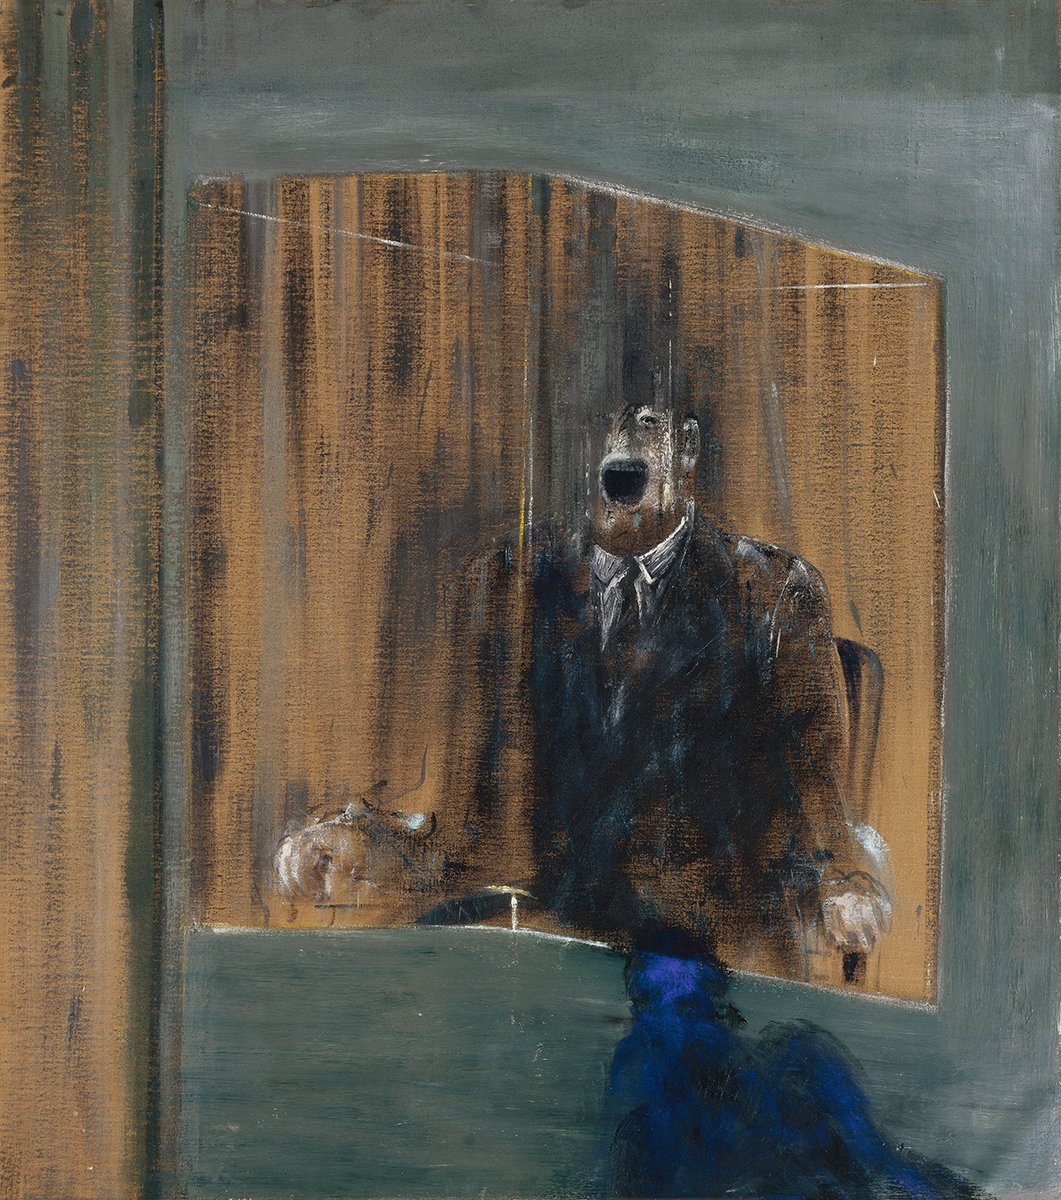 'The confinement of a screaming man in a glass cage or booth evokes a Kafkaesque nightmare of incarceration. His wrists appear to be clamped to the chair, possibly indicating death by electrocution.'Martin Harrison, Francis Bacon: Catalogue Raisonné p.210 Study for Portrait, 1949